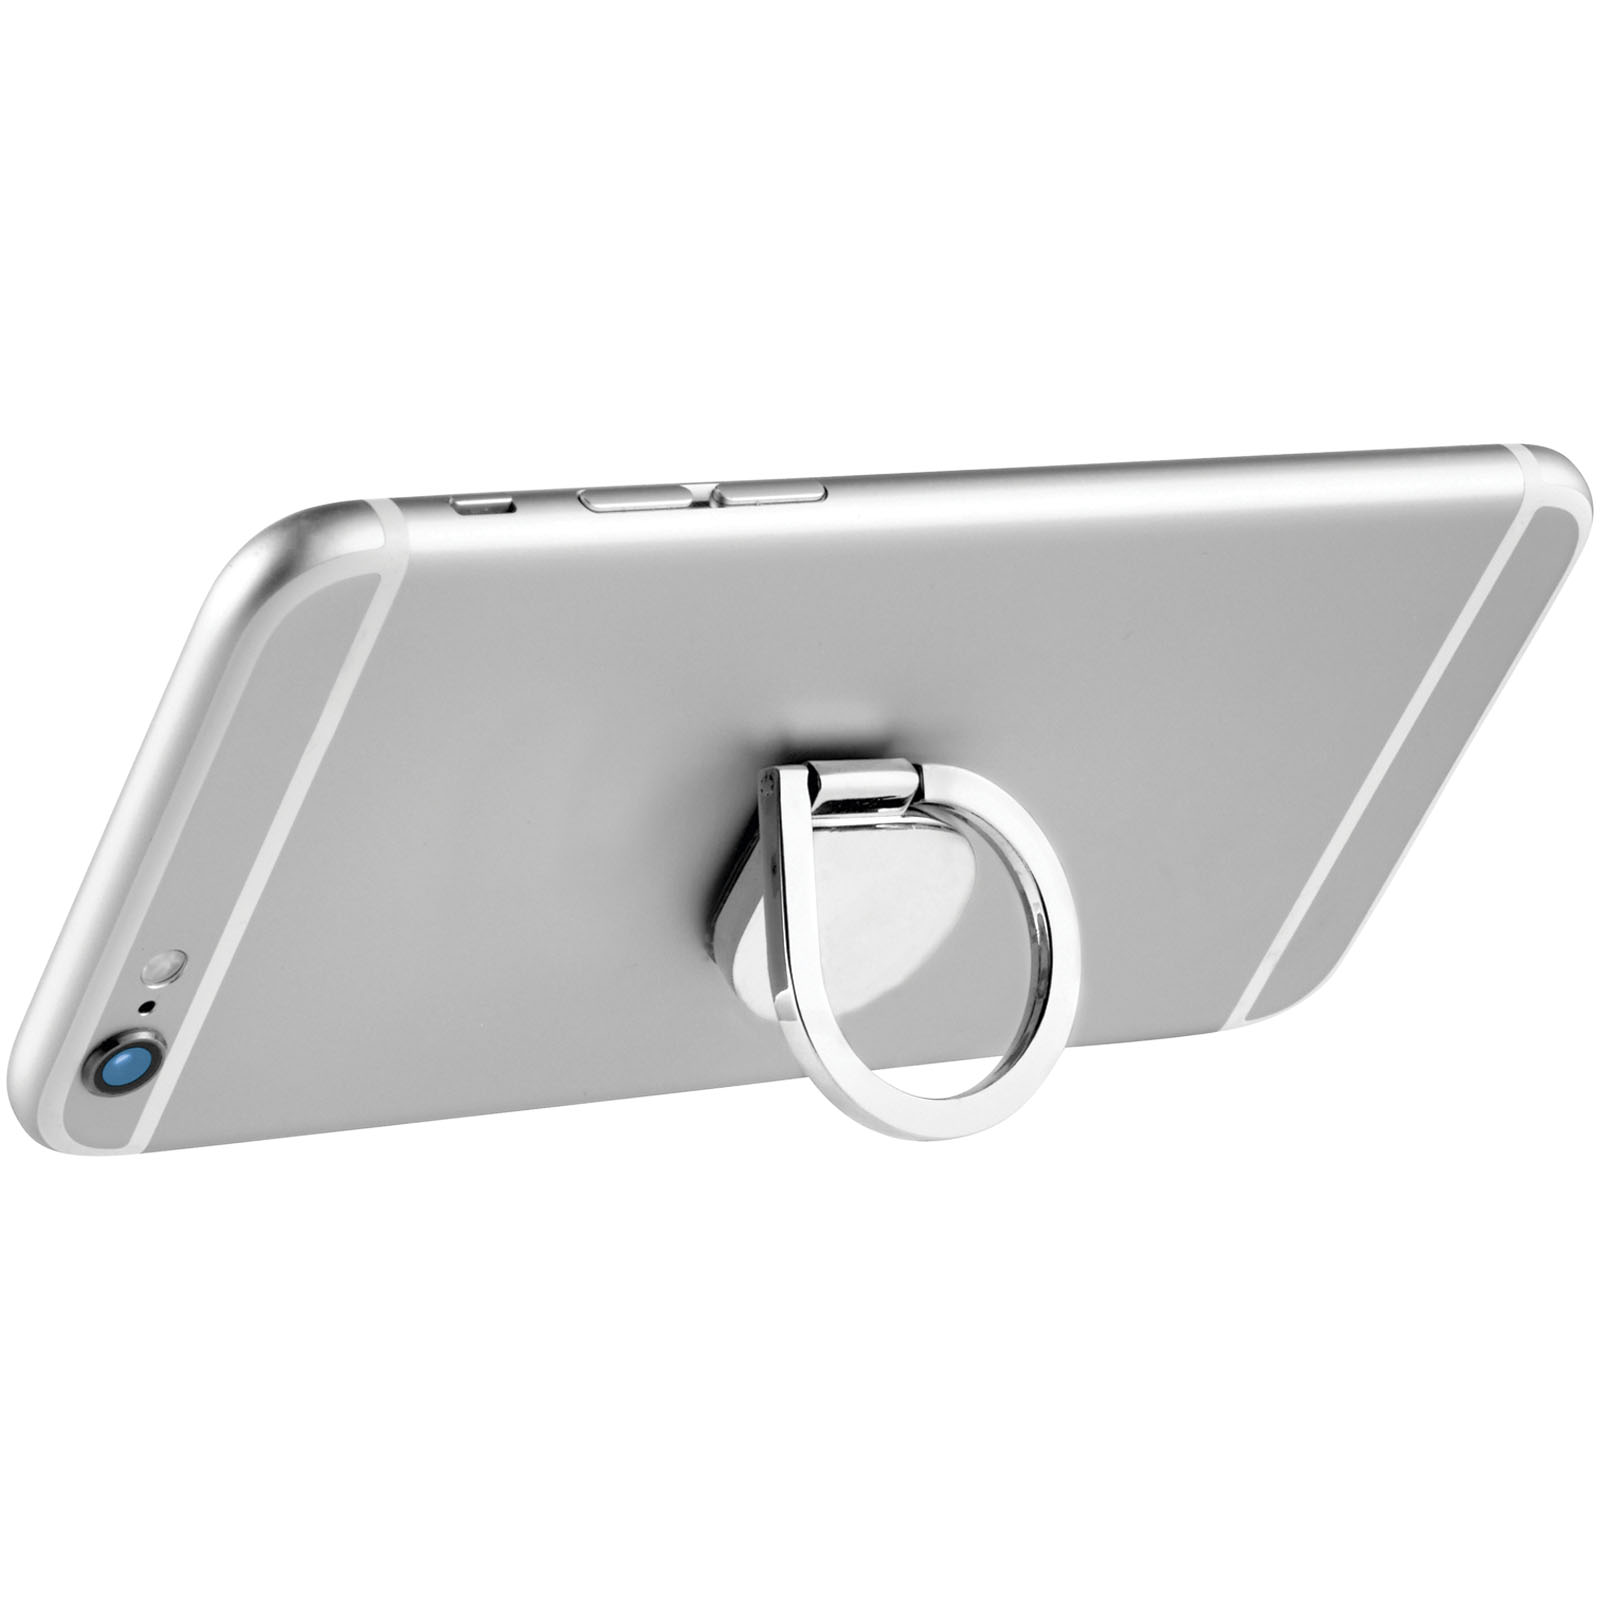 Telephone & Tablet Accessories - Cell aluminium ring phone holder